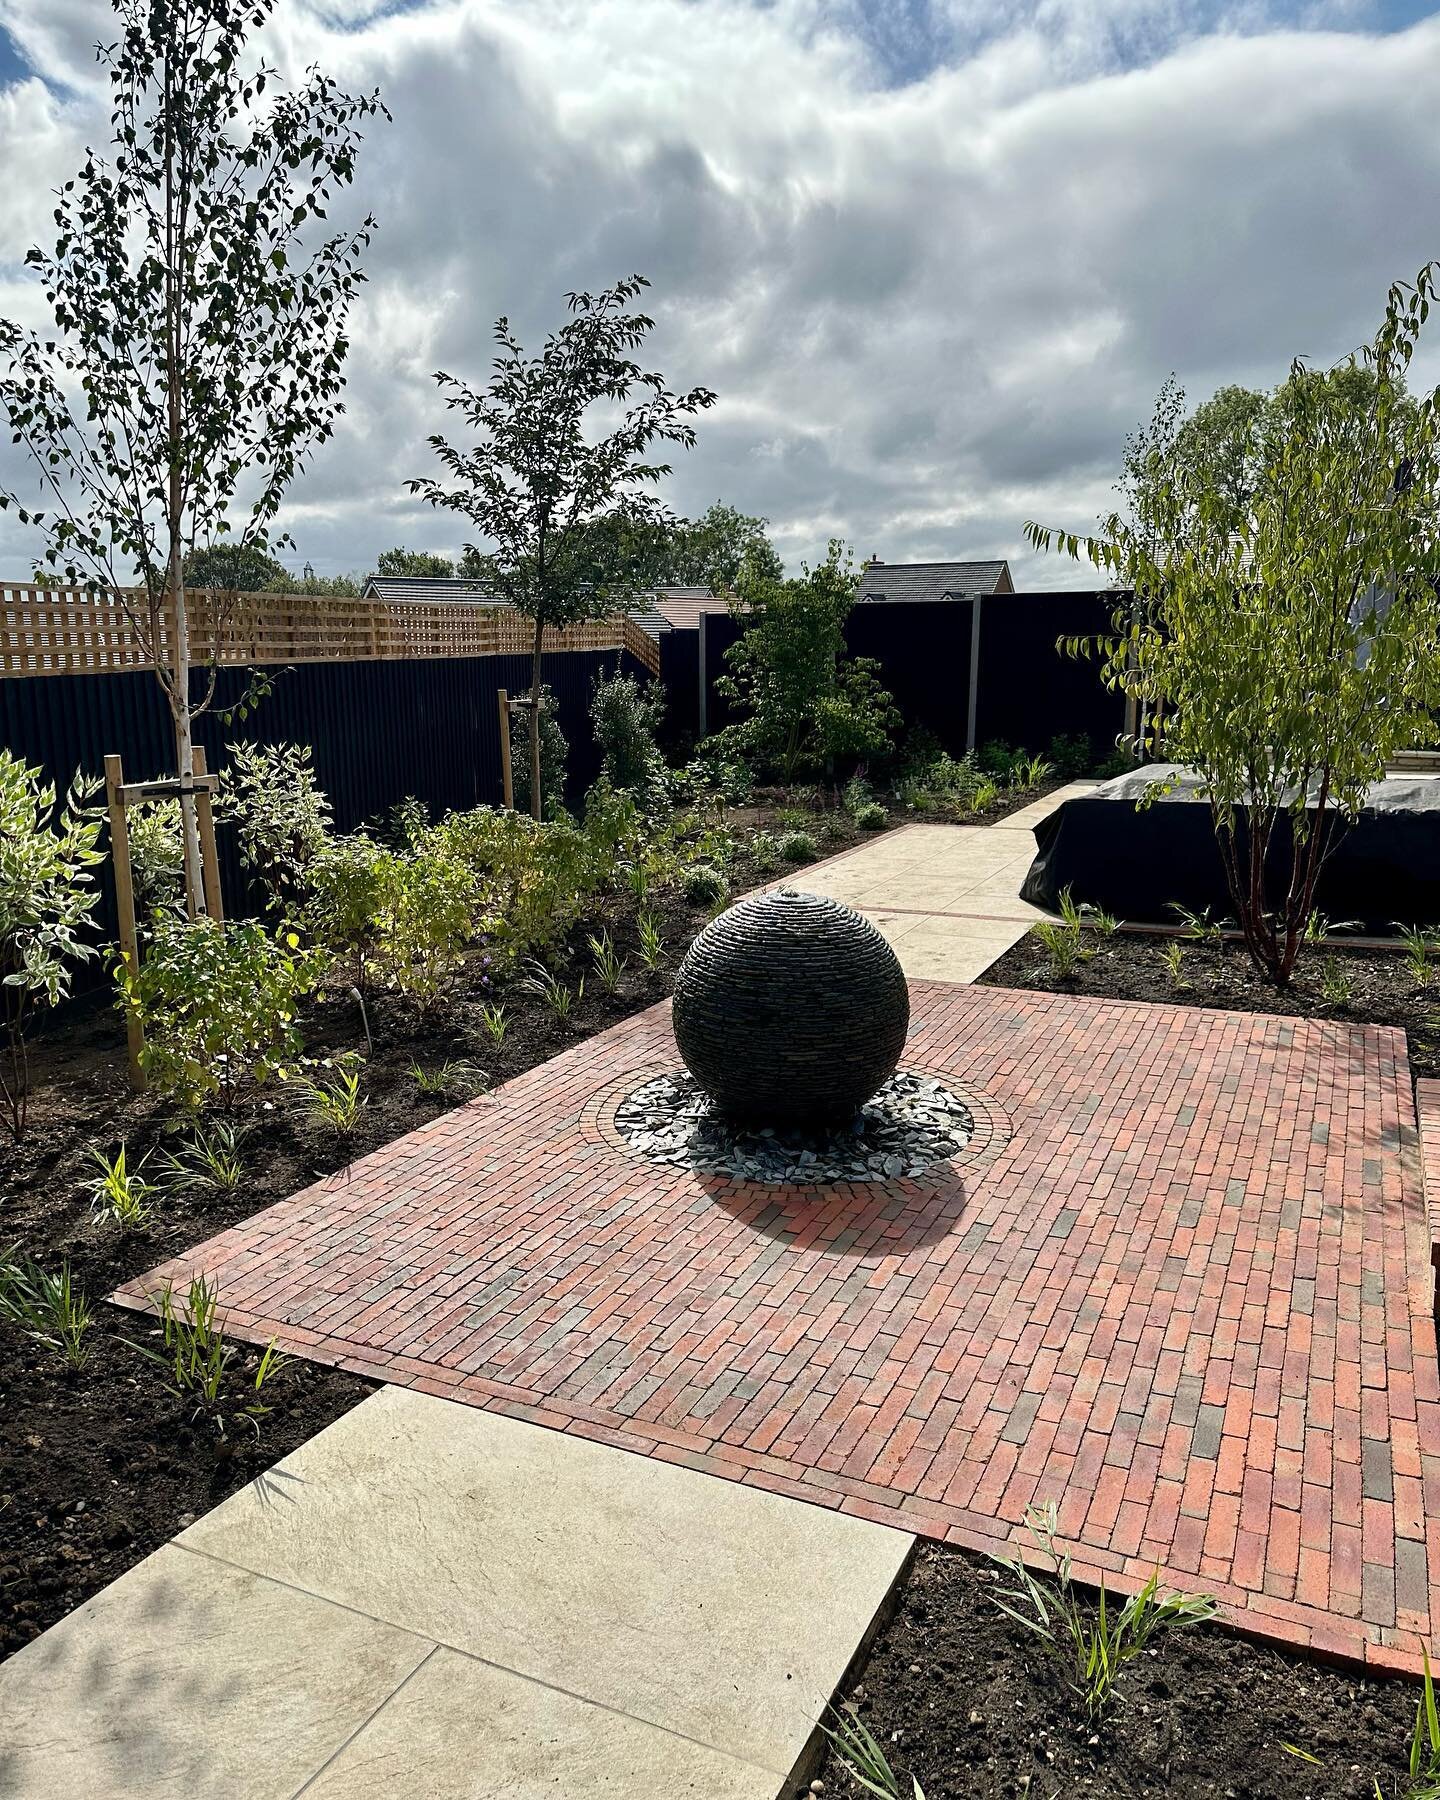 Newly planted garden in #farnham Designed with @victoriabaileygardens built by @mettagarden Materials and plants from
@_londonstone @griffinnurseries @northhillnurseries @jeremy.hastings